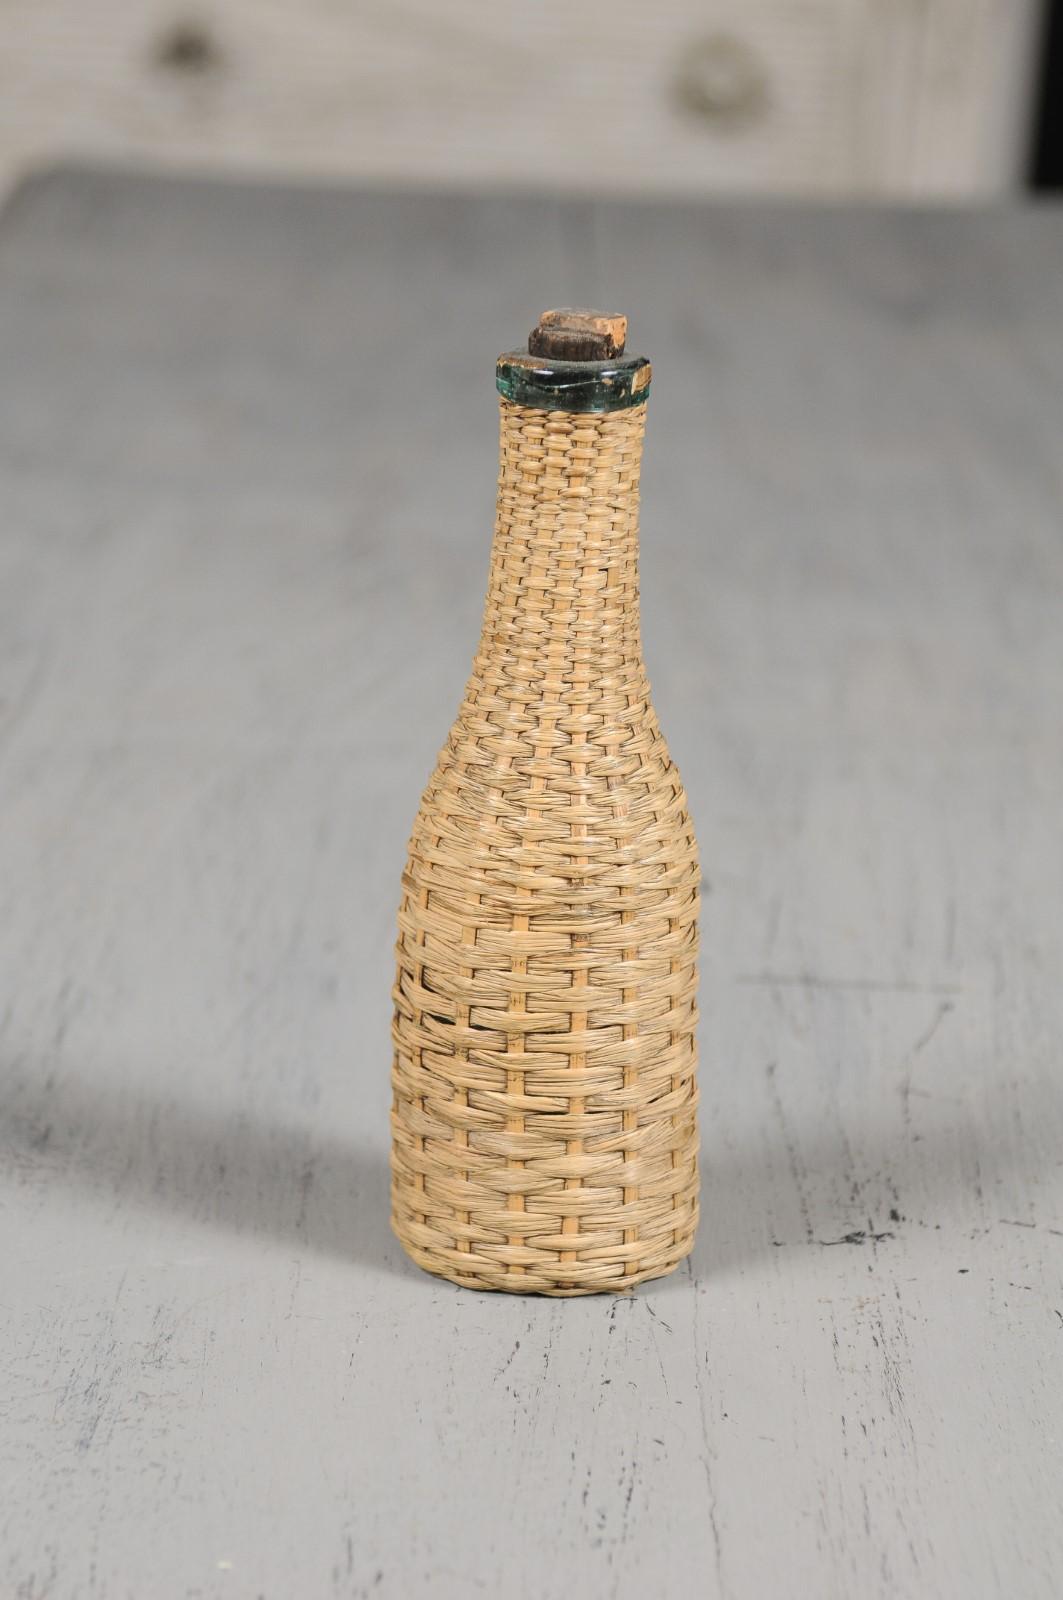 An English straw covered bottle from the 19th century with cork. Charming our eyes with its rustic appearance, this English bottle is covered with straw and presents its nicely weathered cork. Perfect to be placed in a kitchen, a dining room or in a